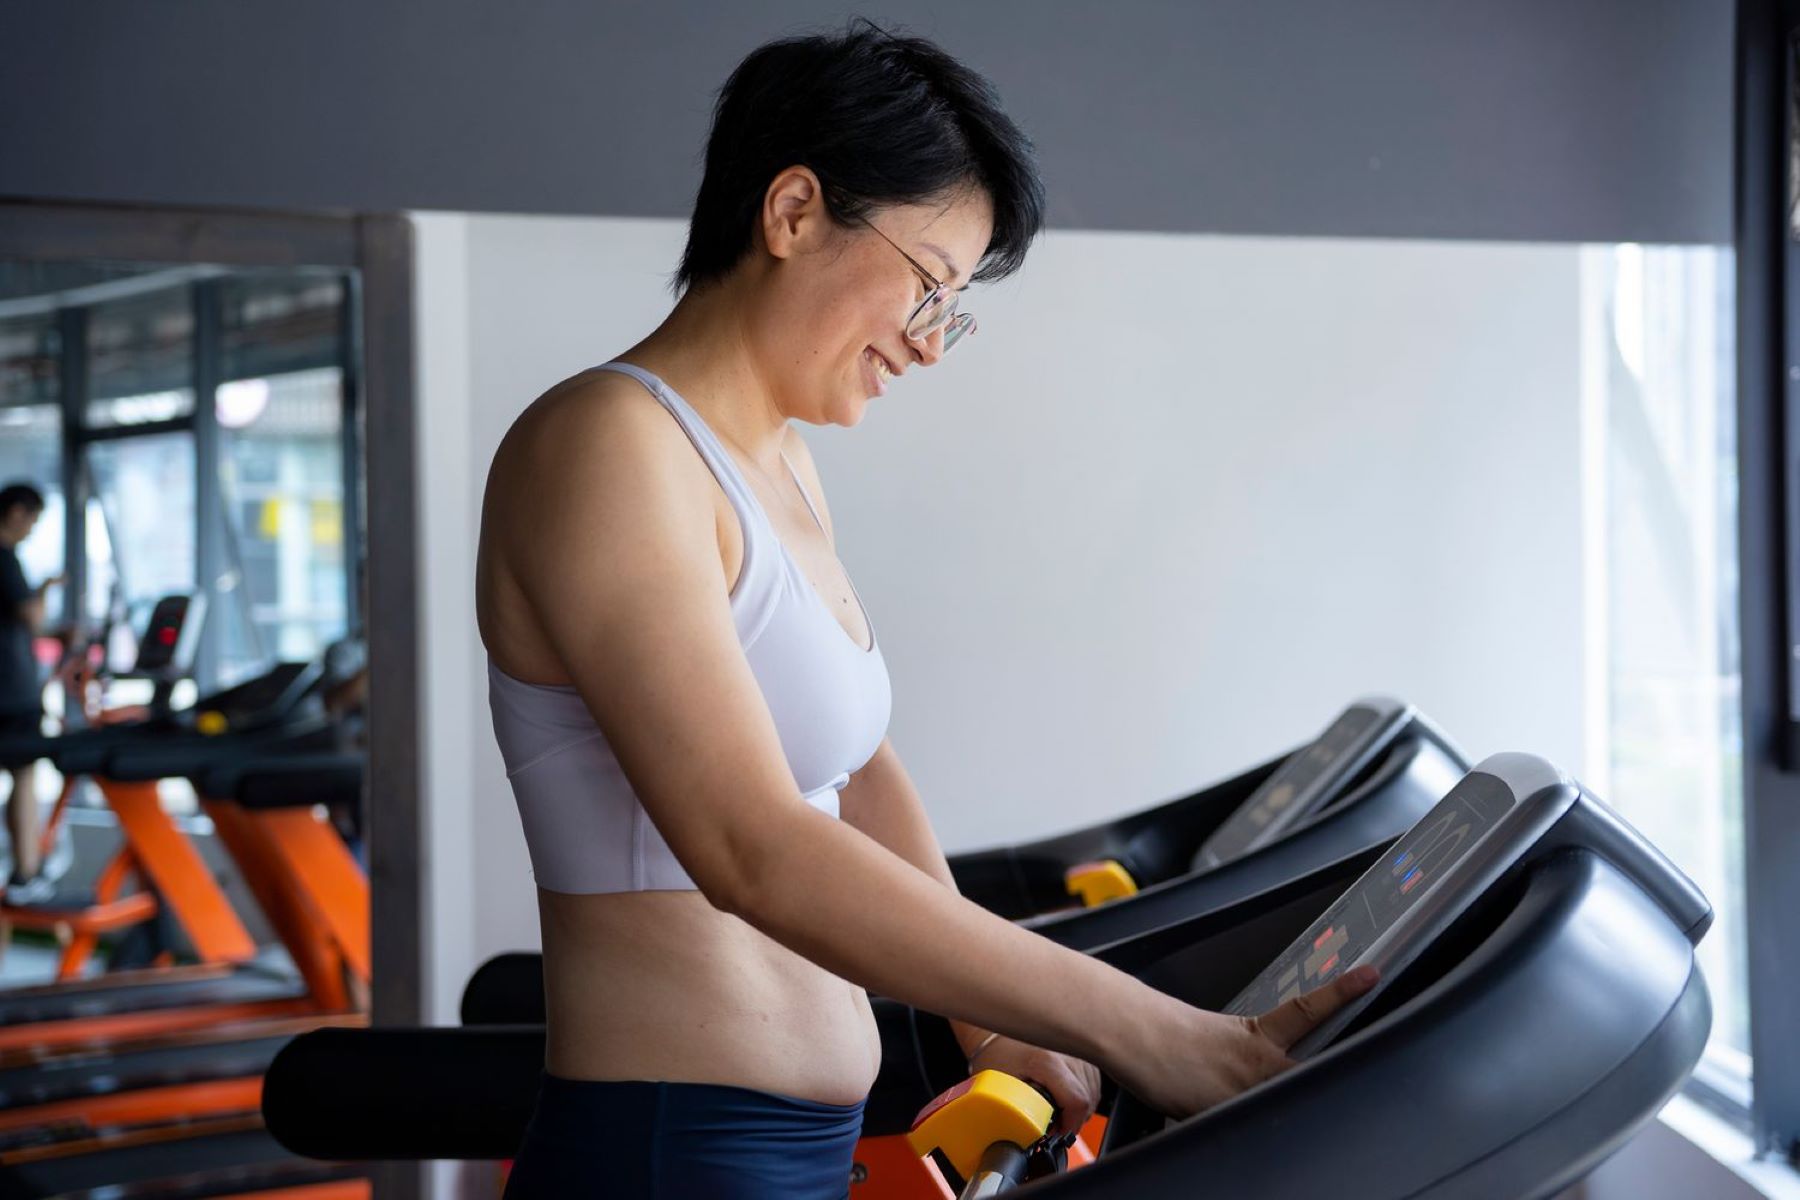 What Is The Best Speed On Treadmill For Weight Loss